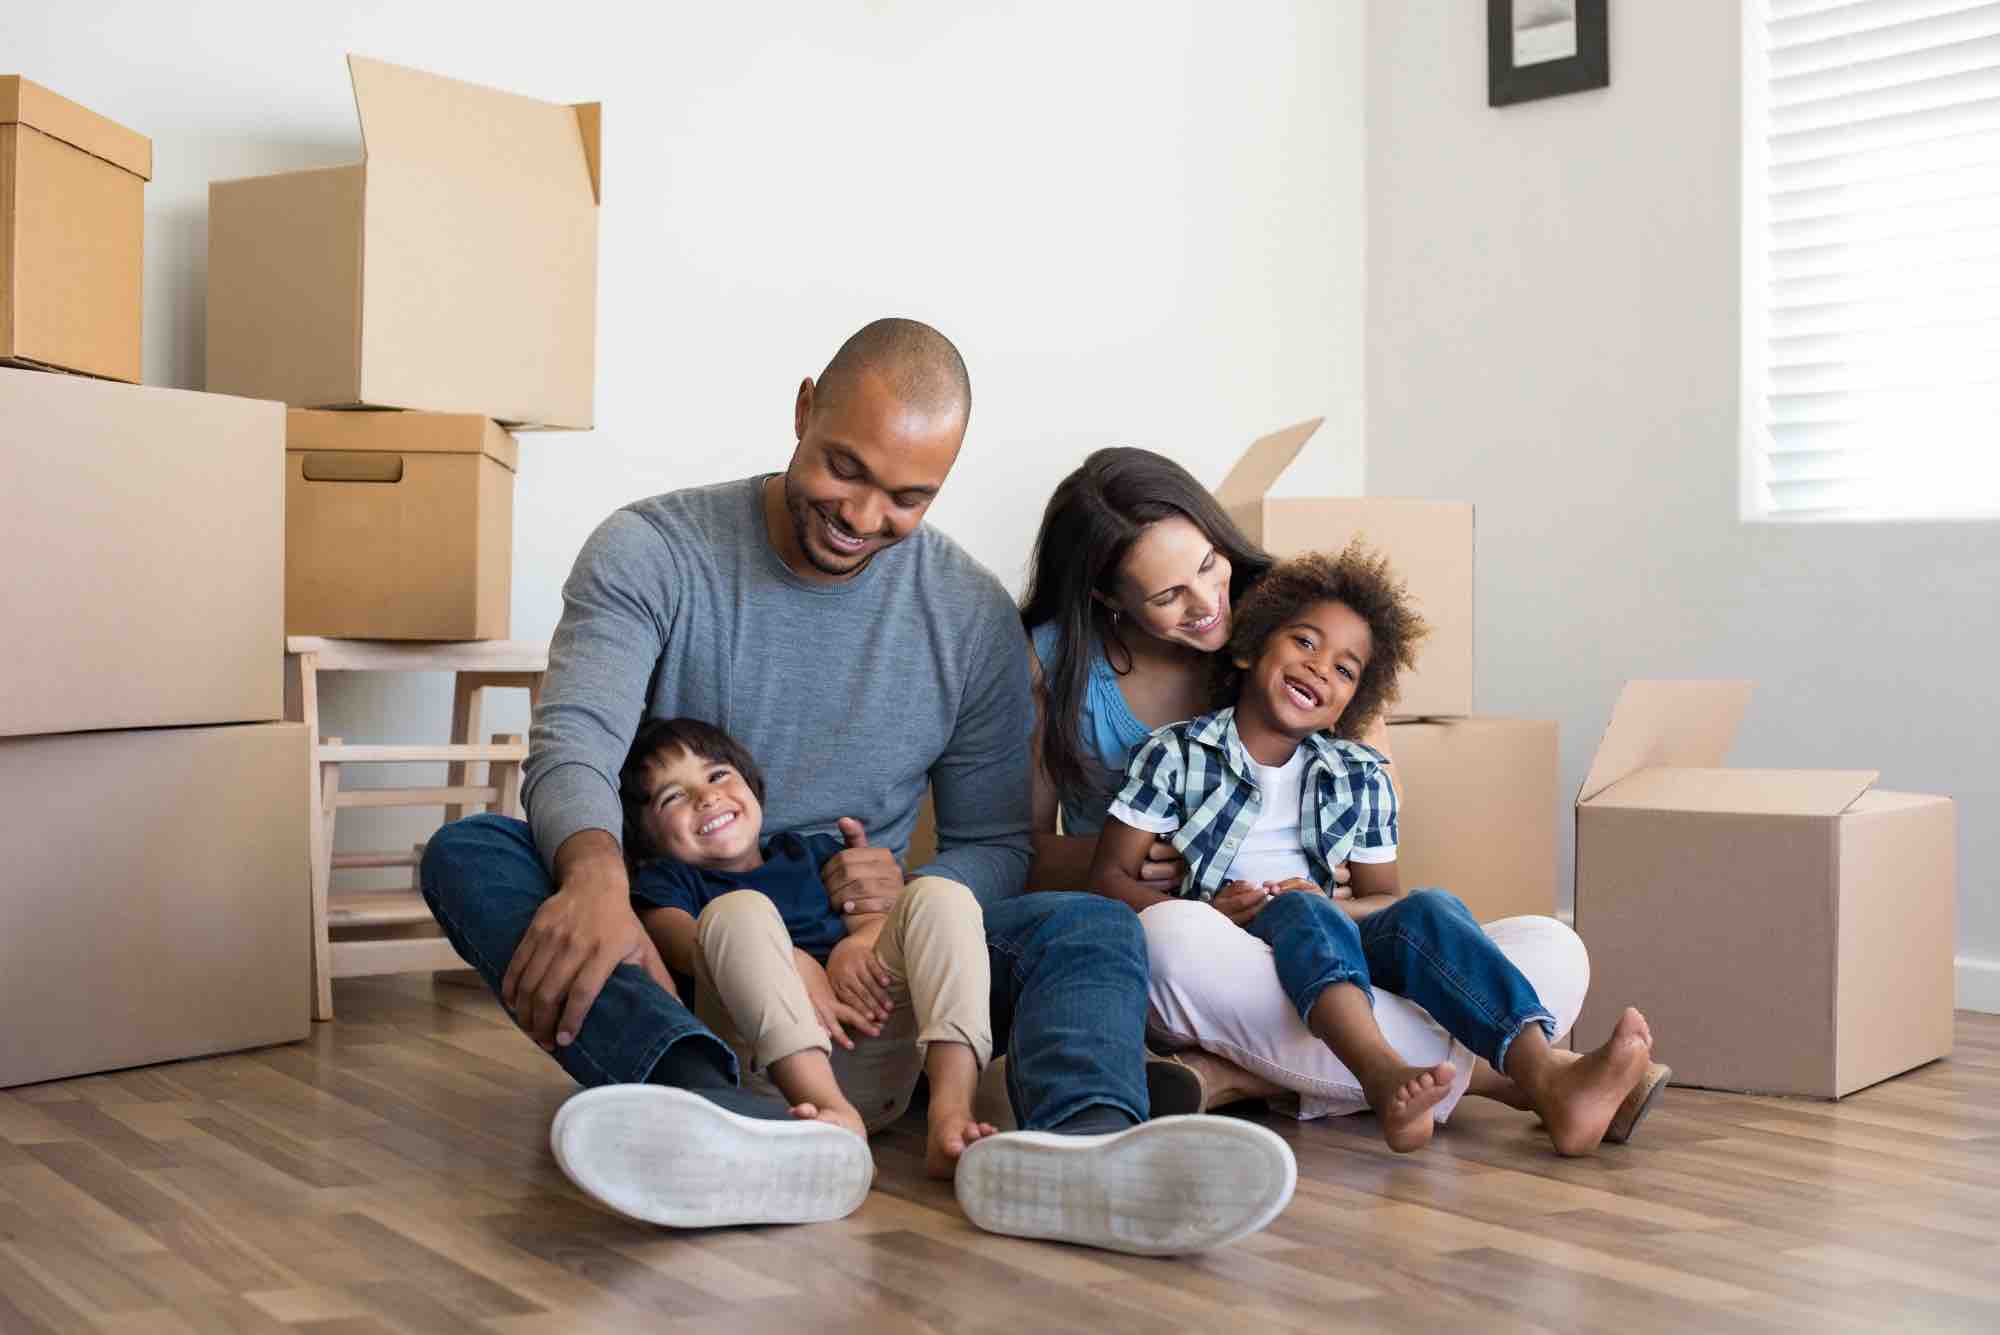 Personal Loans To Help With Moving Costs